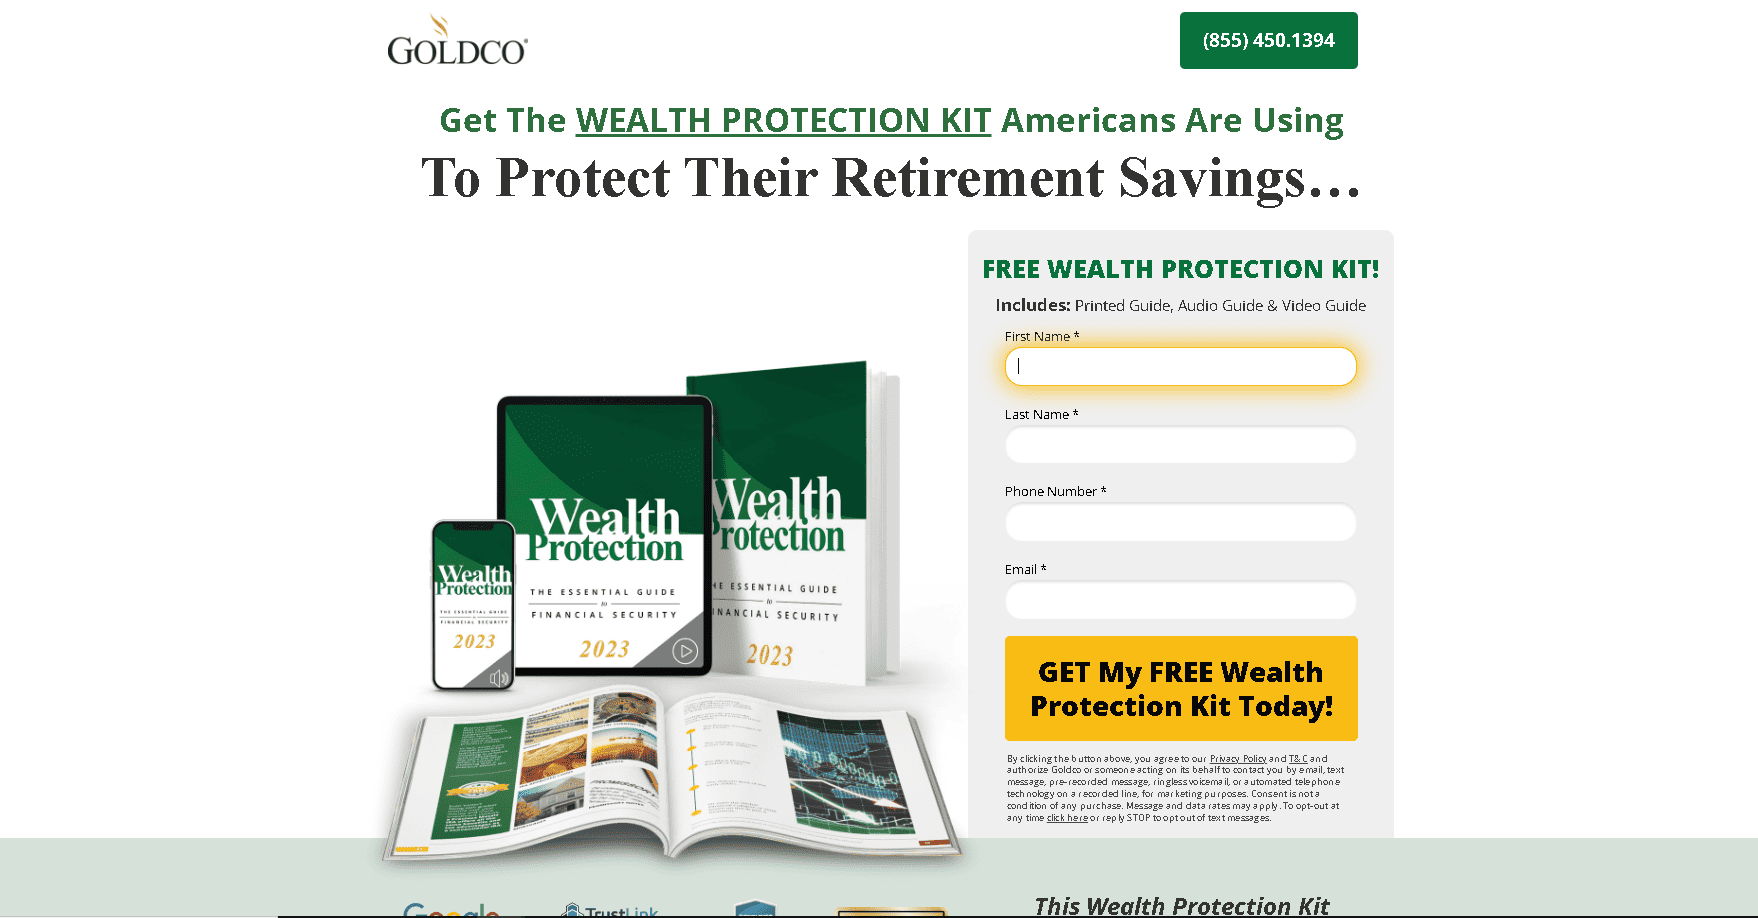 Goldco Wealth Protection Kit